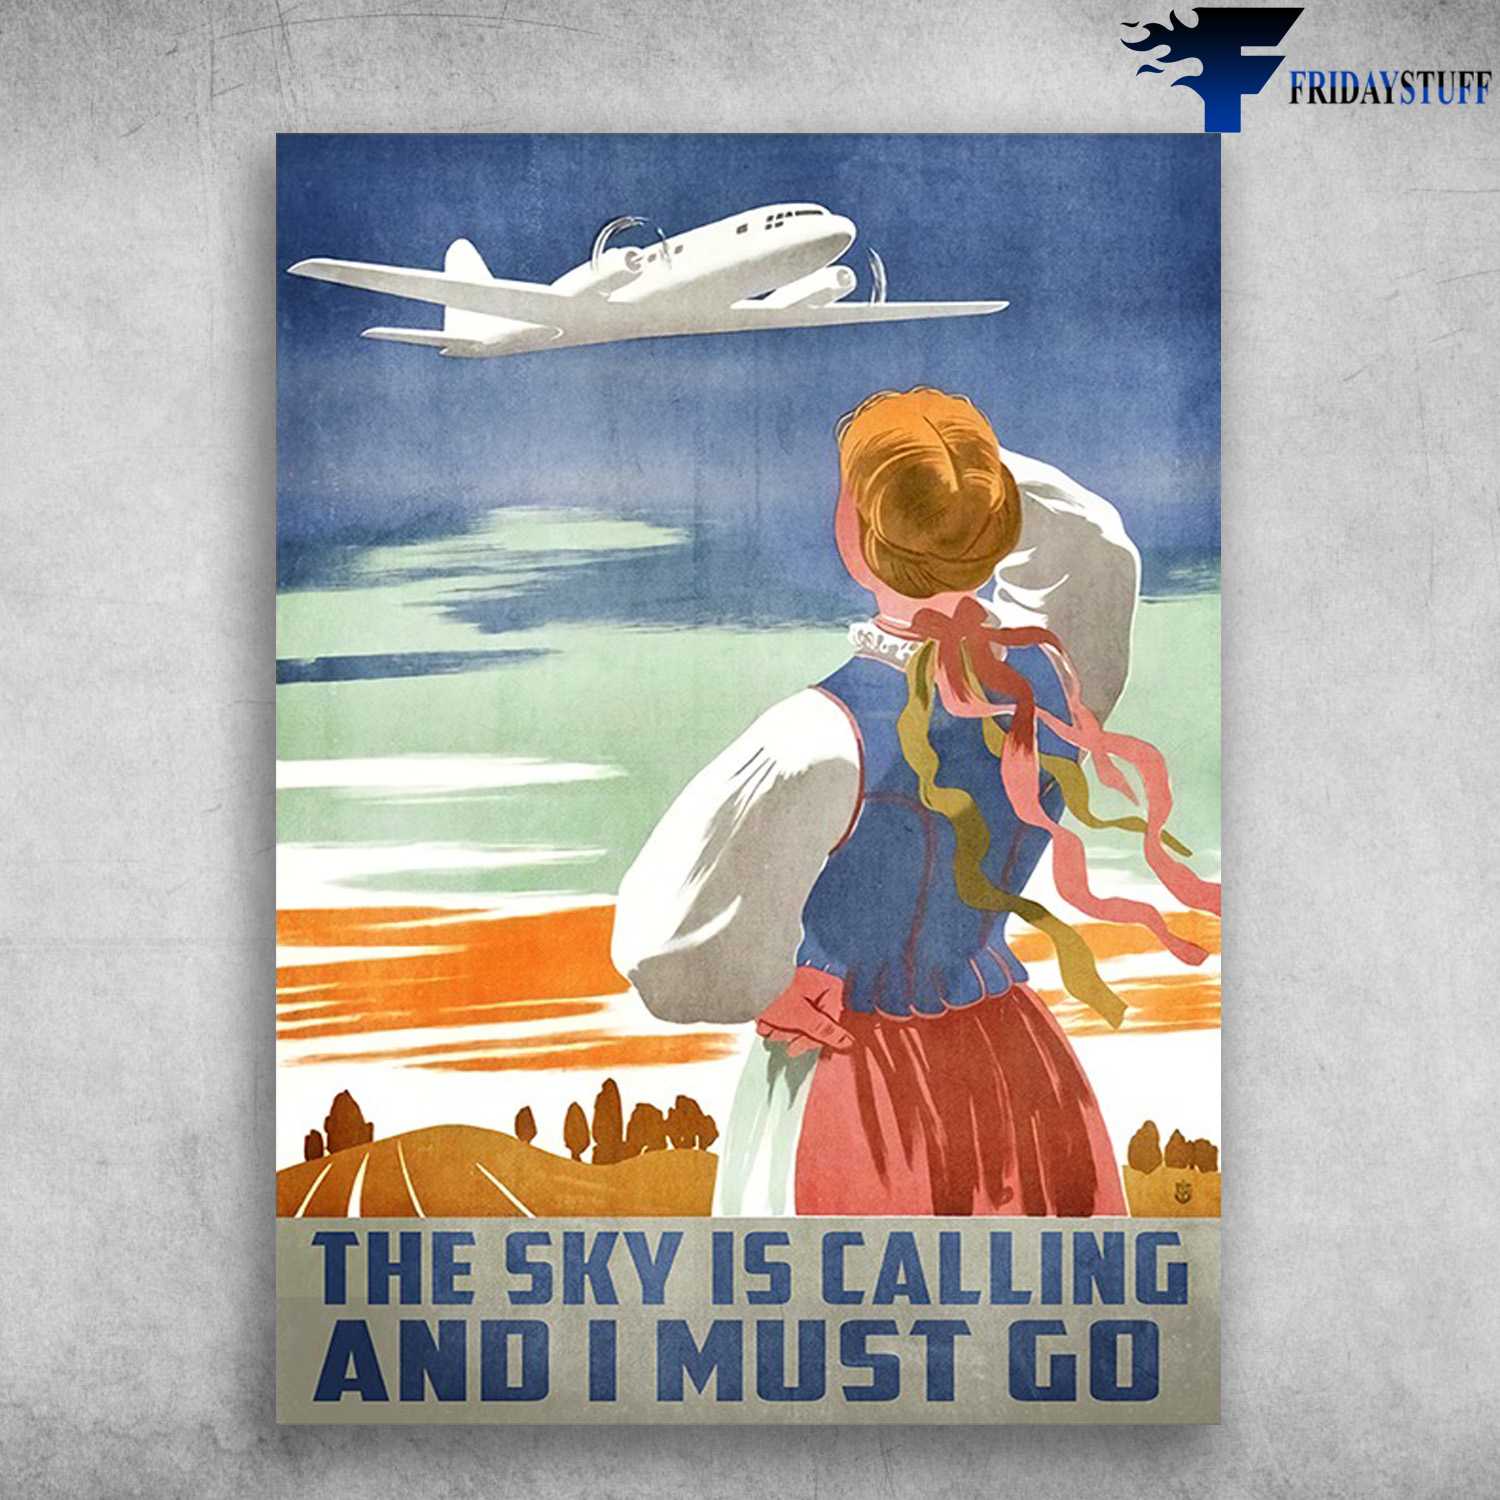 Flight Attendant, Airplane Poster - The Sky Is Calling, And I Must Go